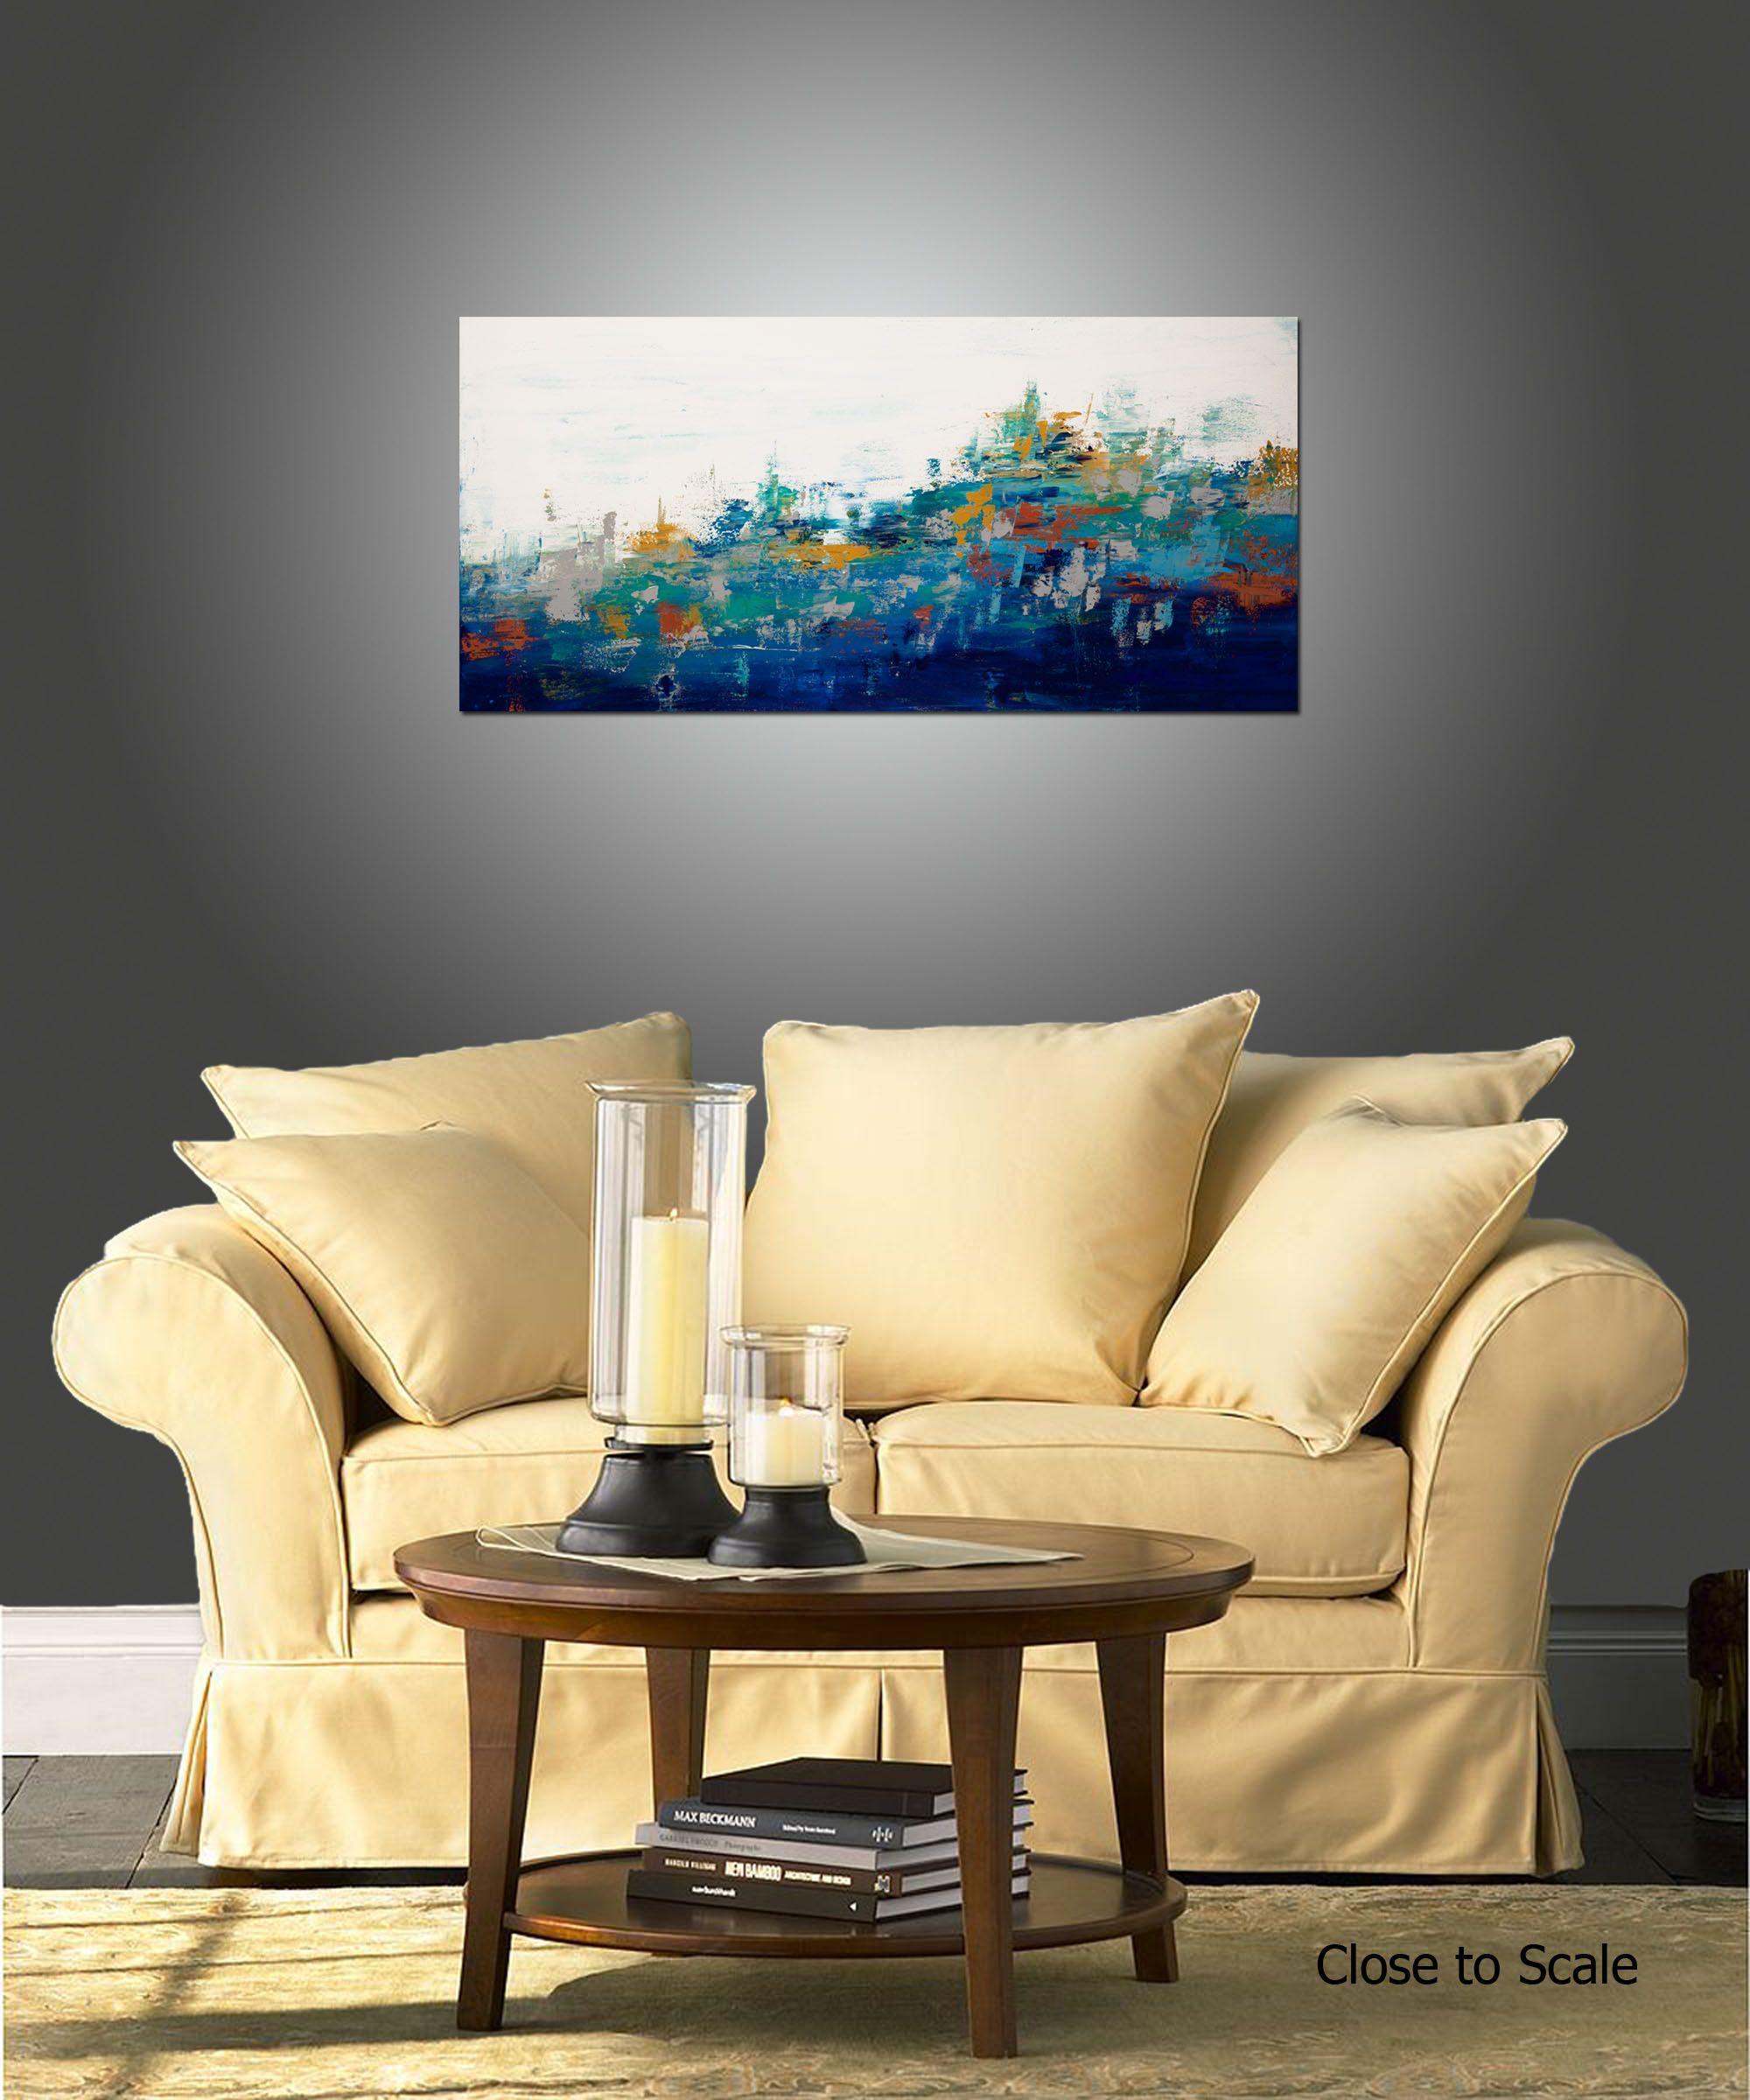 Mountain Vista 2 is an original painting, created with acrylic paint on gallery-wrapped canvas. It has a width of 48 inches and a height of 24 inches with a depth of 1.5 inches (24x48x1.5).    The colors used in the painting are white, blue, teal,